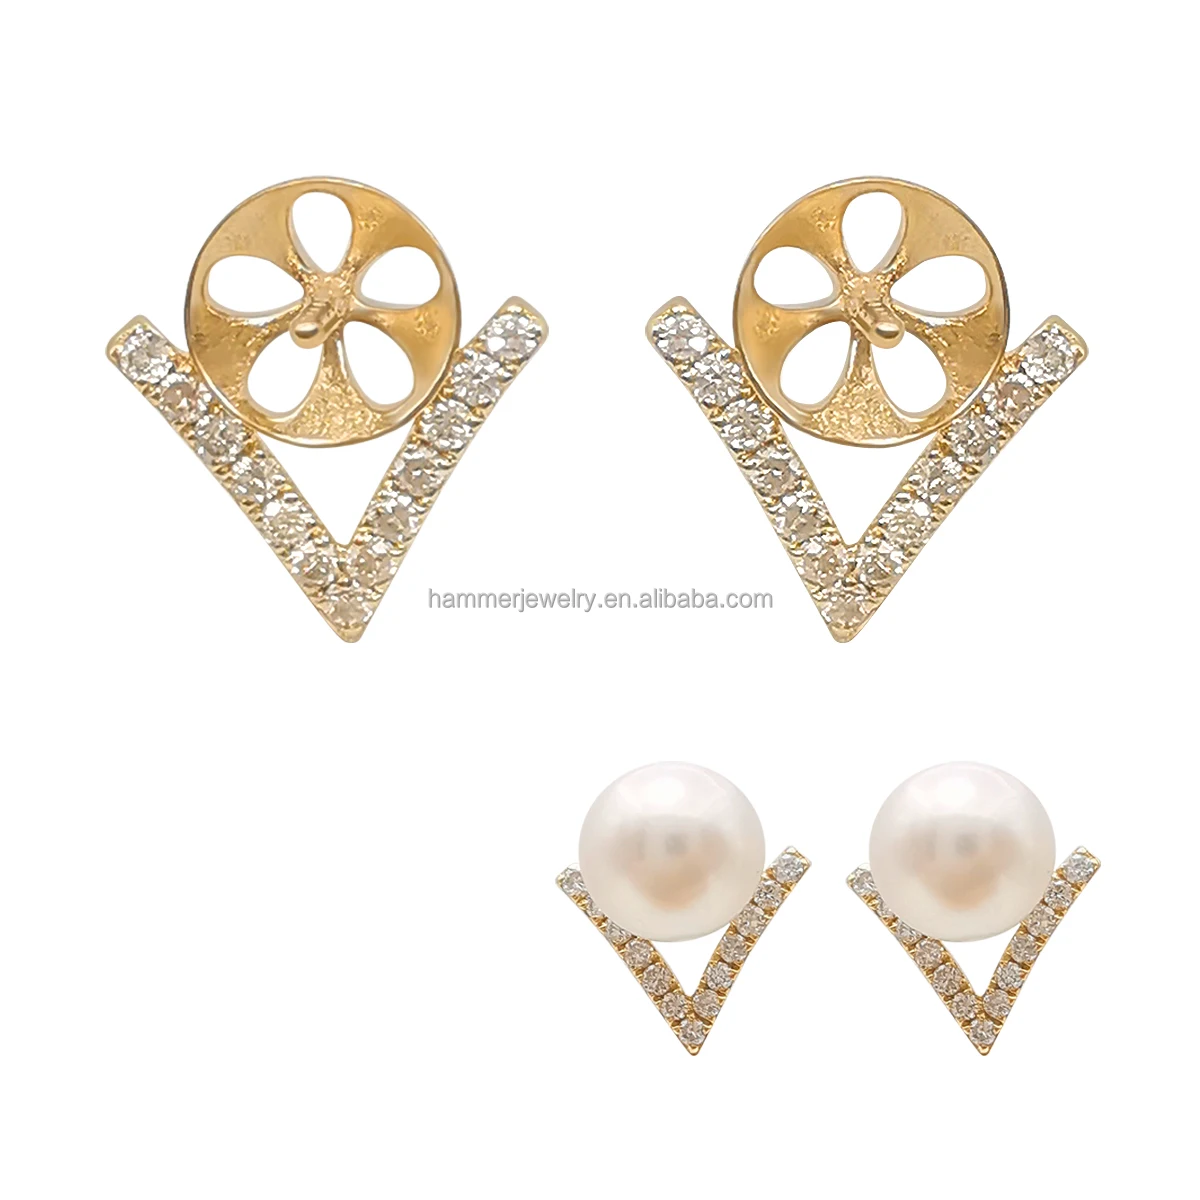 

Wholesale Au585 Gold Diamonds Fine Jewelry Stud Earring Holder Mount Pearl Round GEM Stones Jewelry Finding Accessories